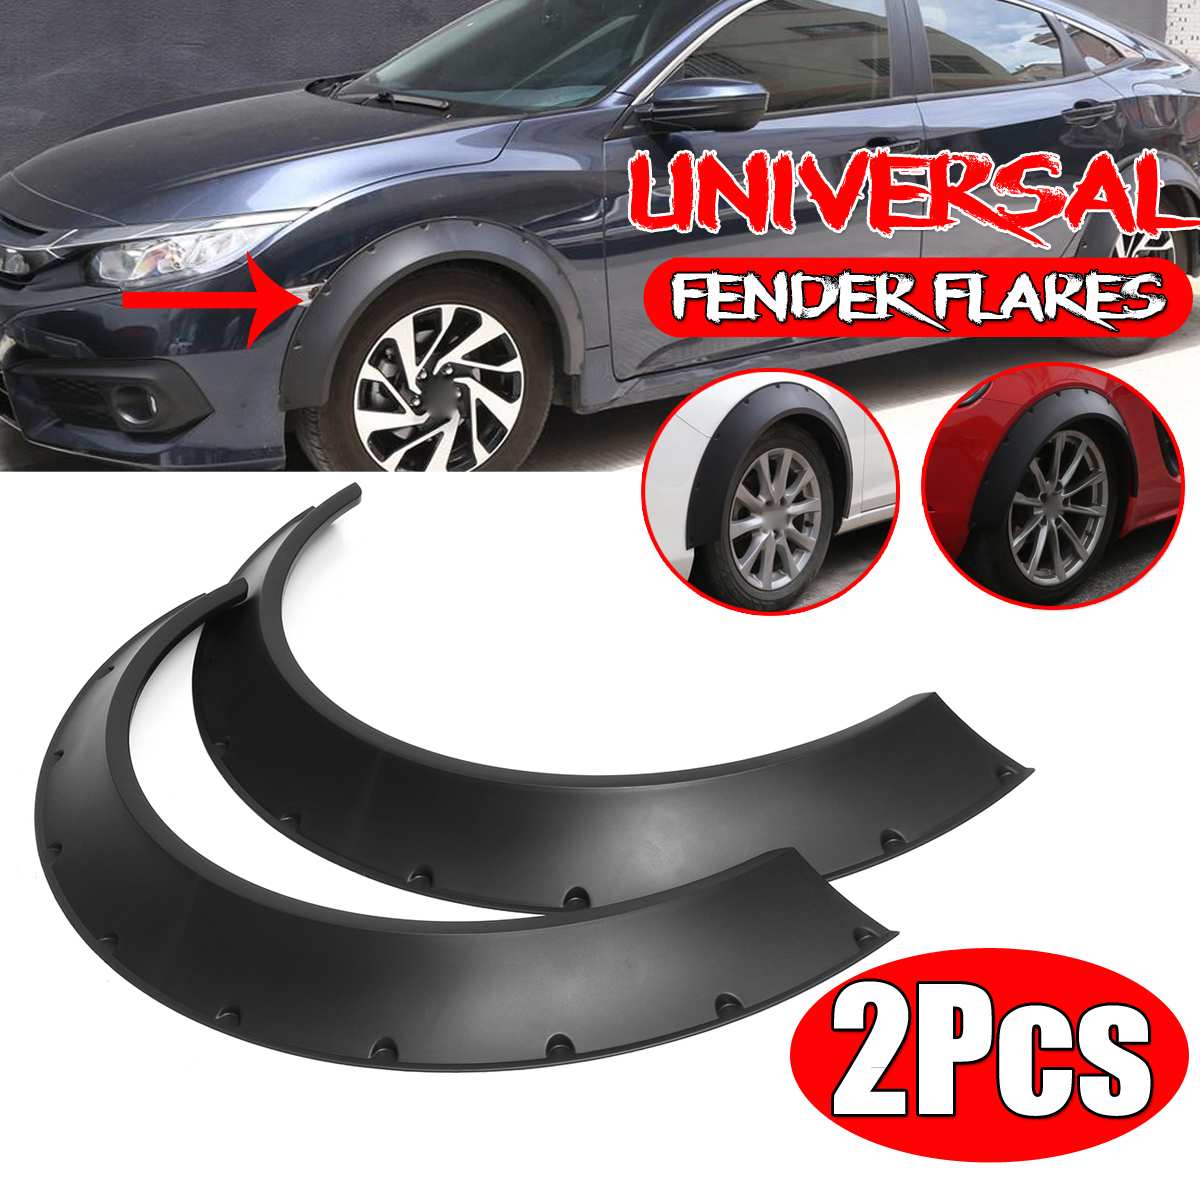 2Pcs Universal Arch Car Wheel Eyebrow Fender Flares Auto Mudguard  Anti-scratch Protector Strips Auto Replacement Parts - AliExpress